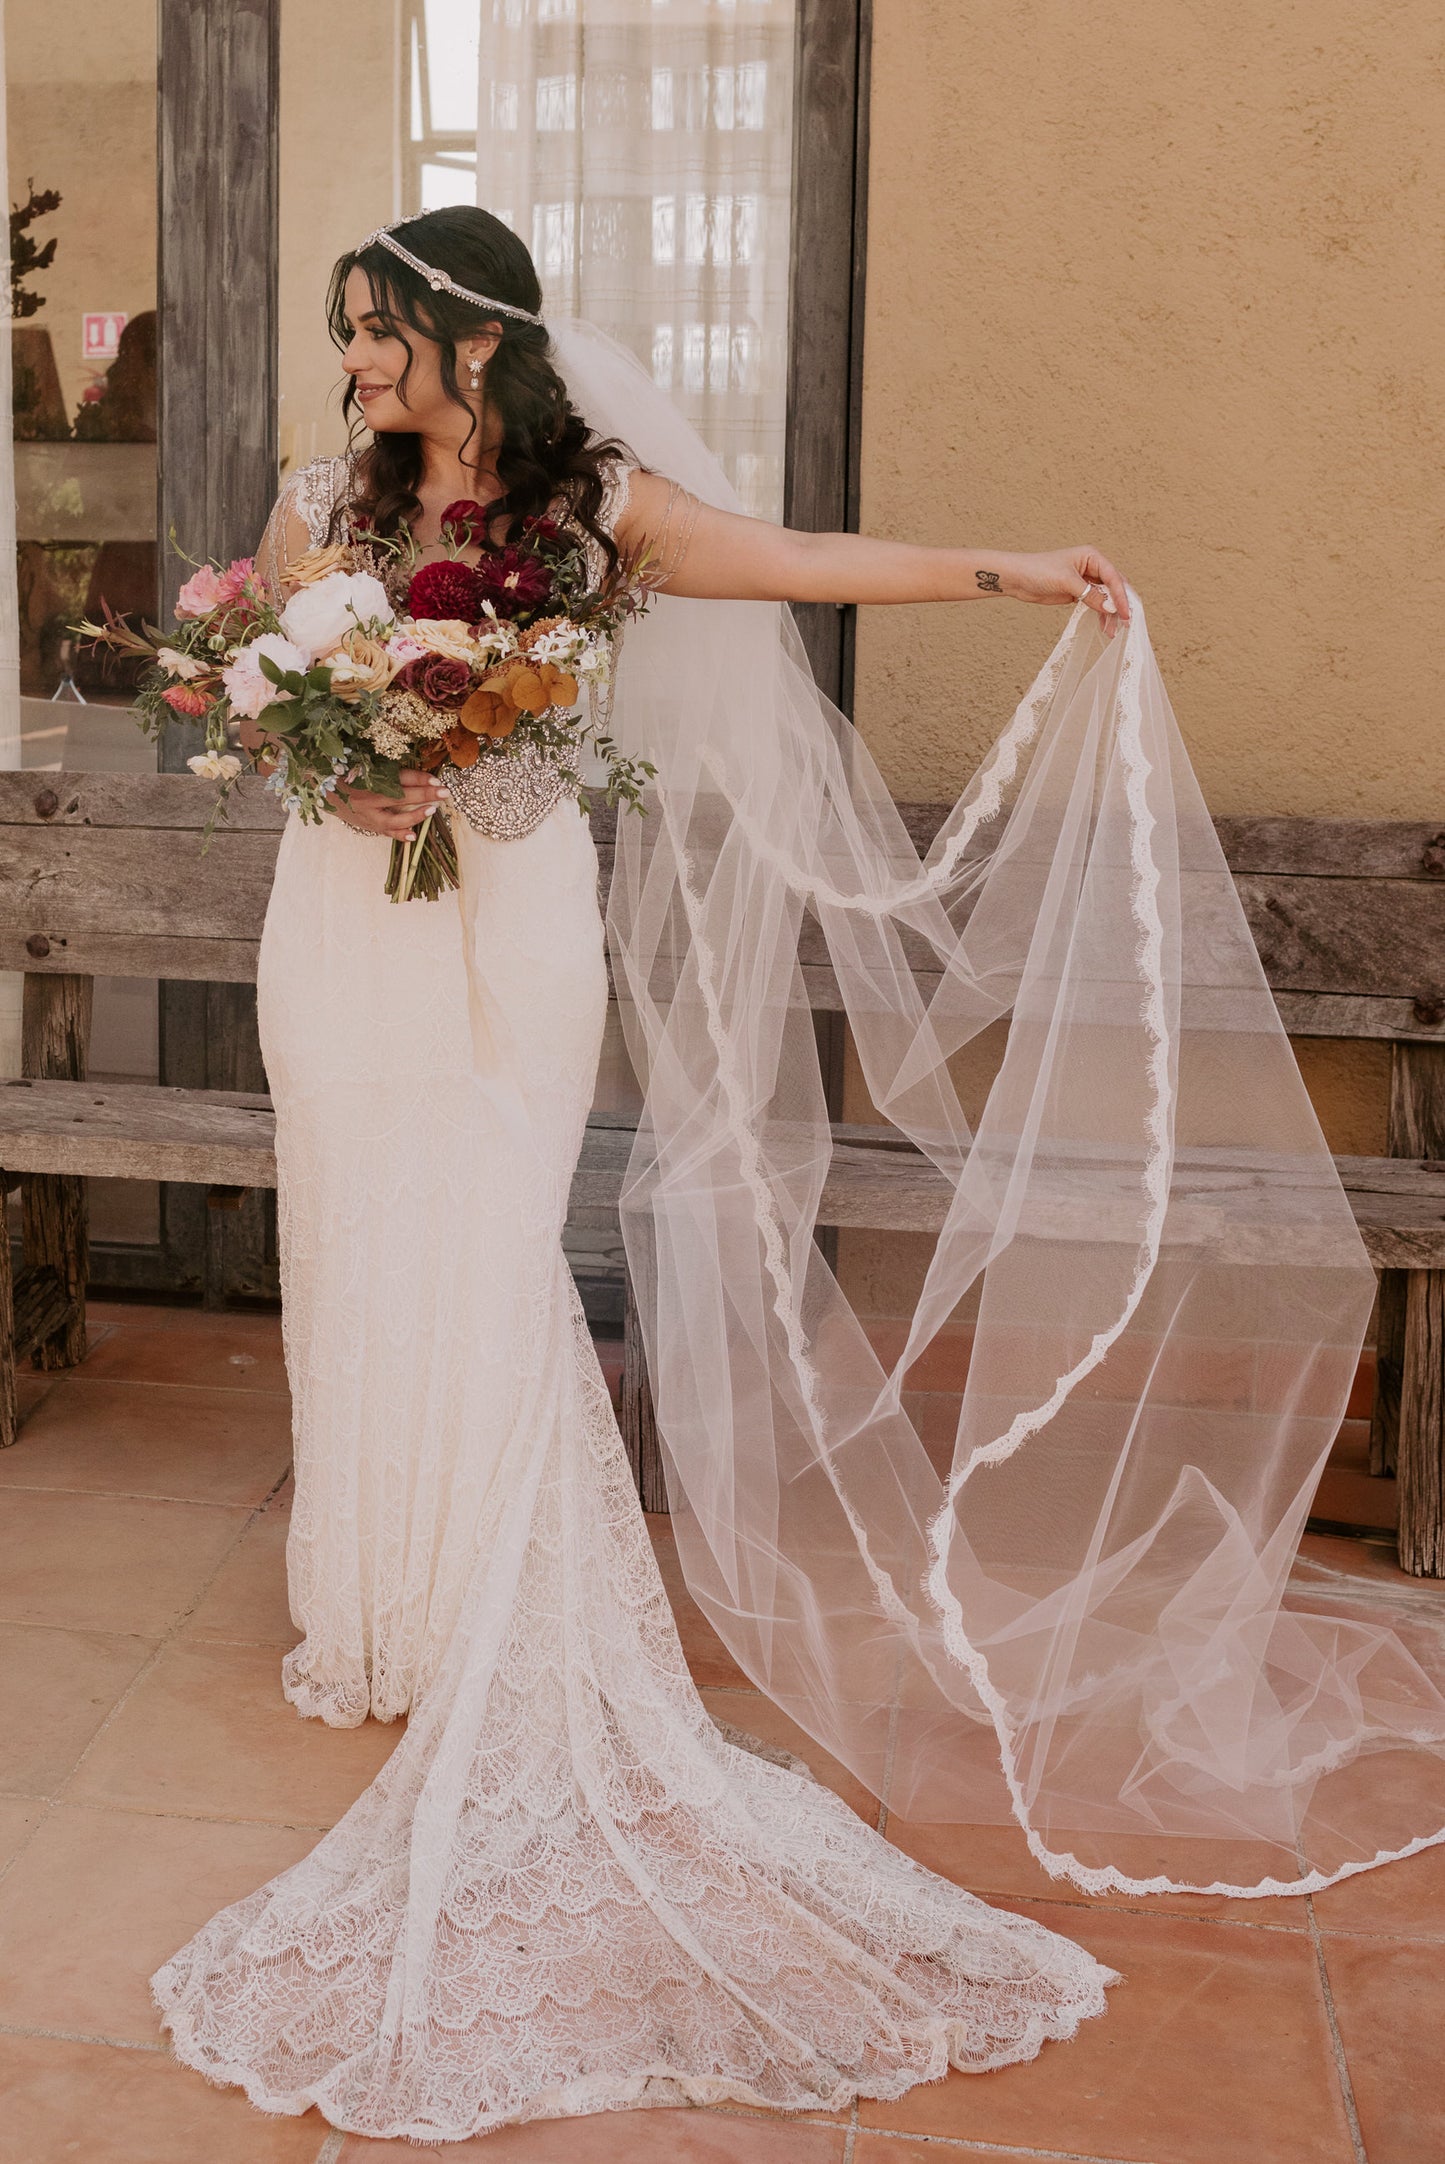 Gorgeous Scalloped Bridal Veil with Floral Lace